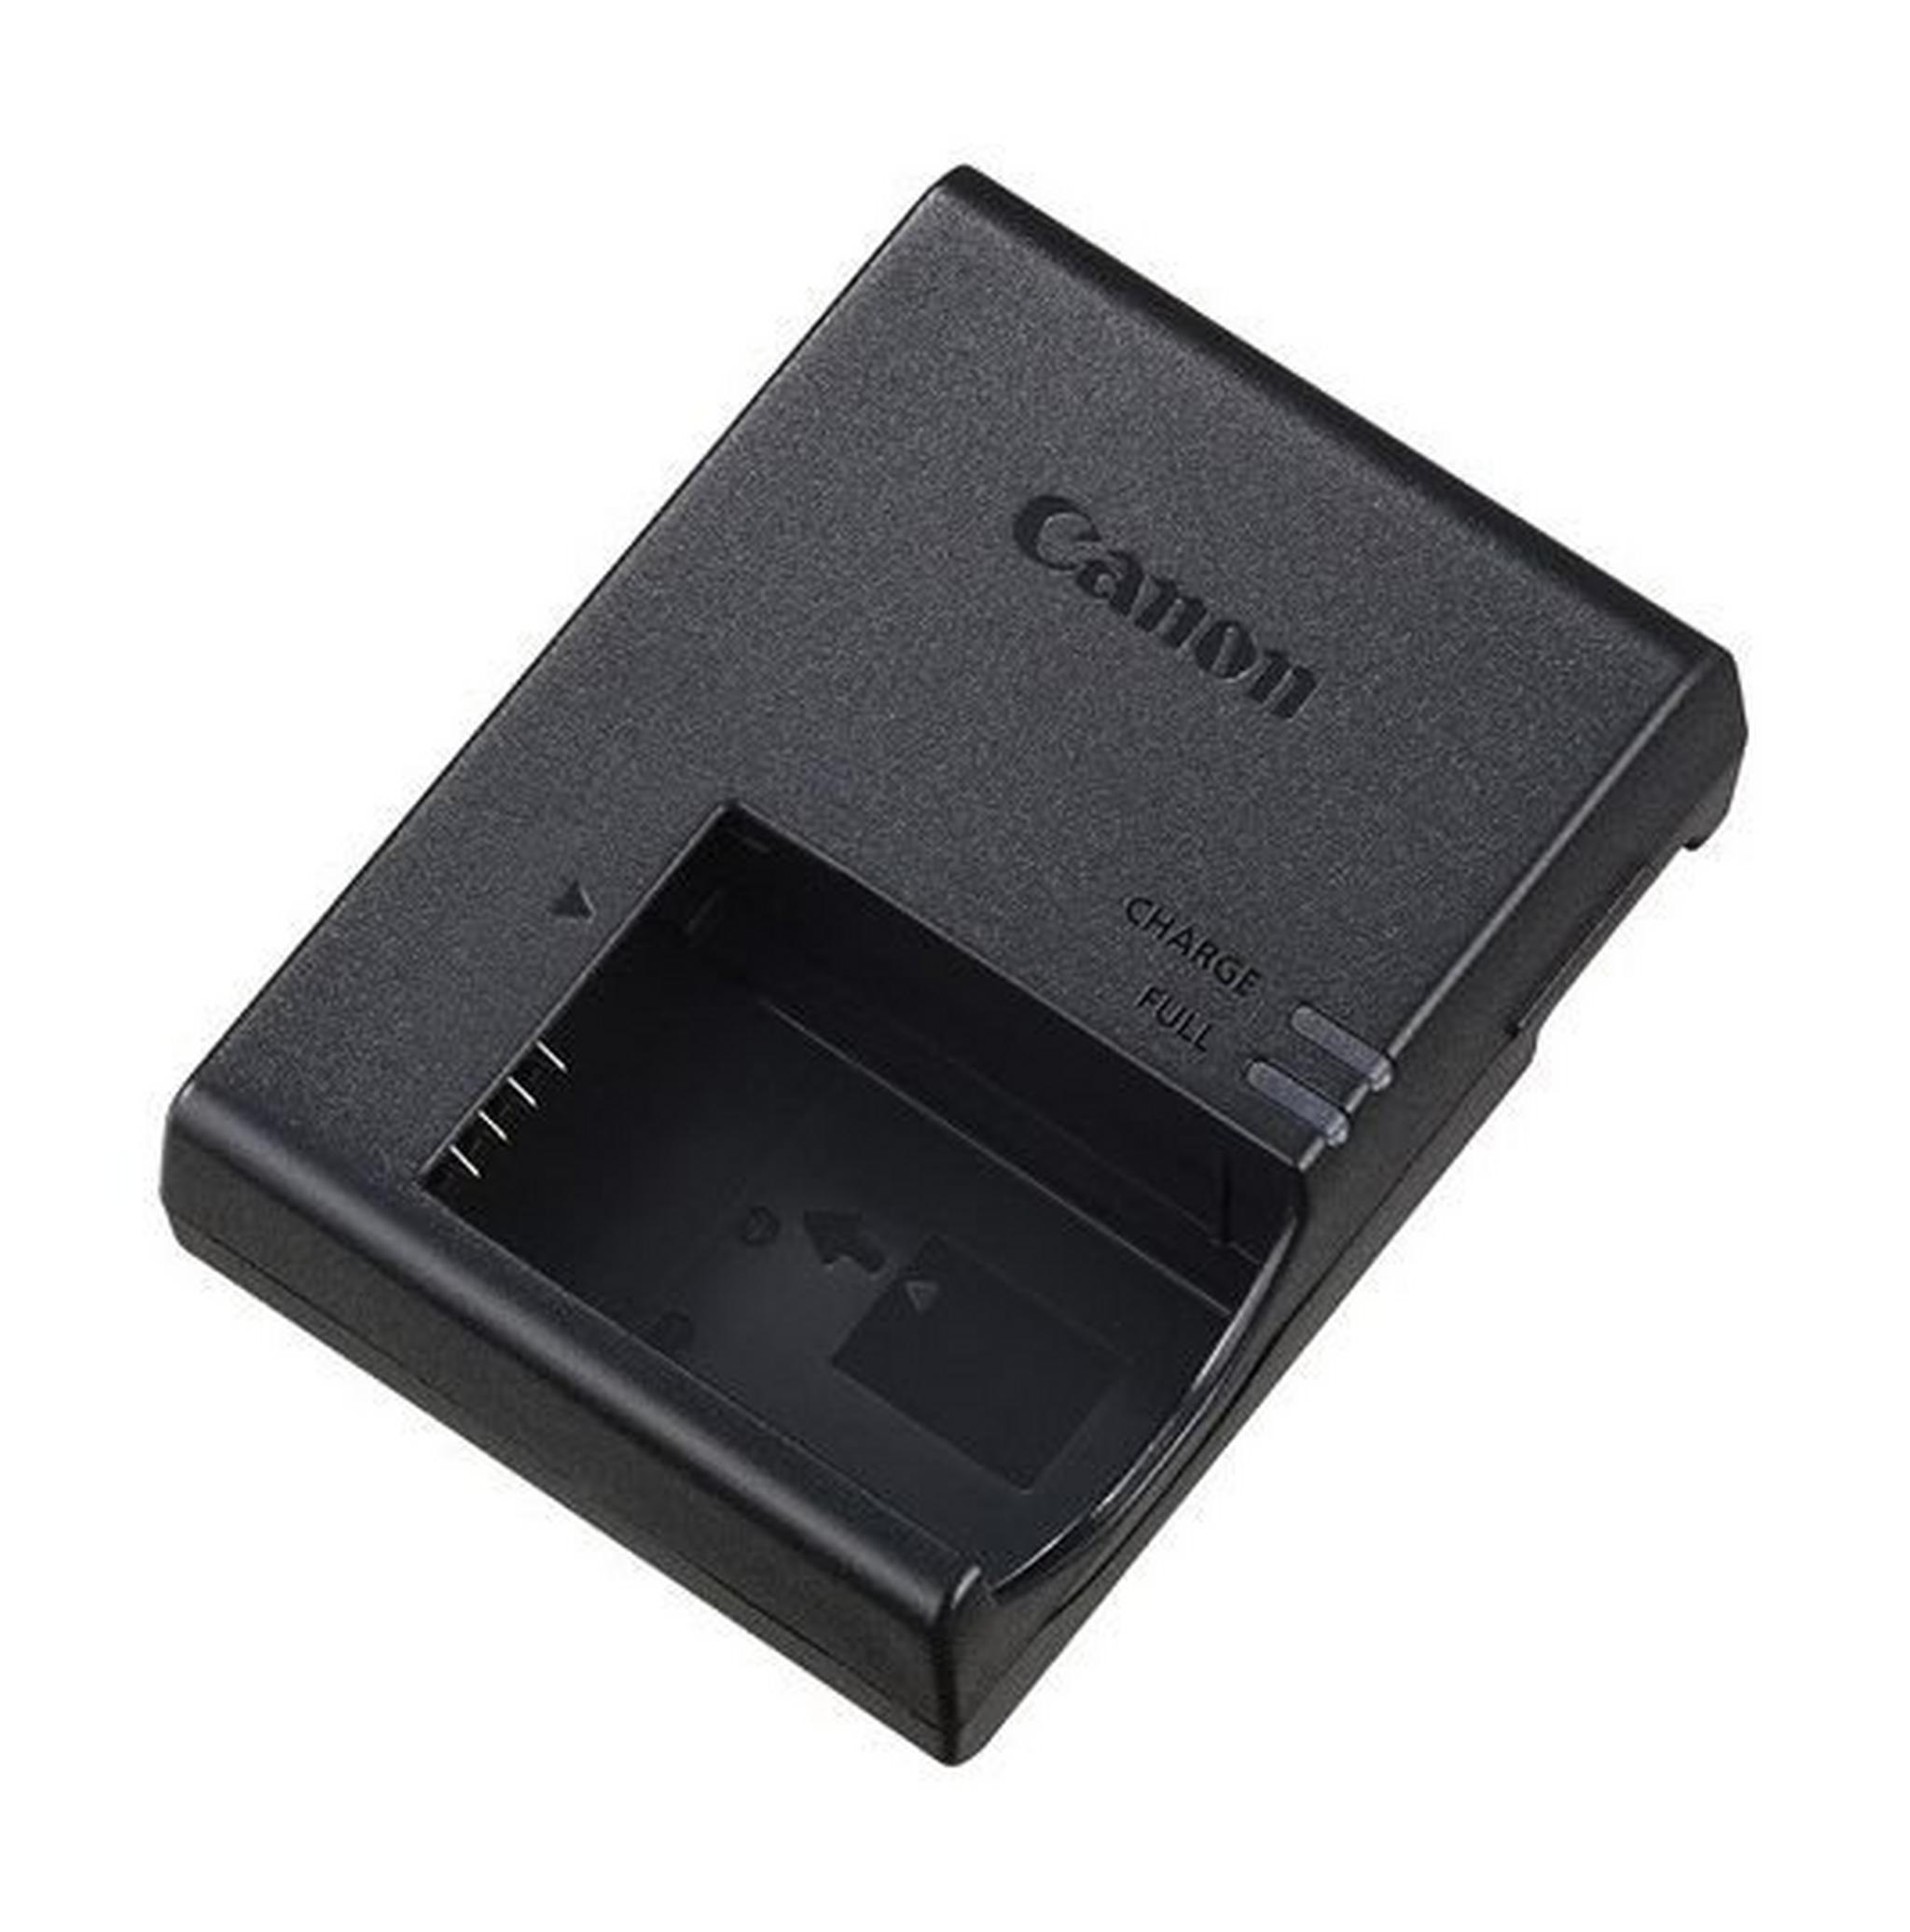 Canon Battery Charger LC-E17 - Black